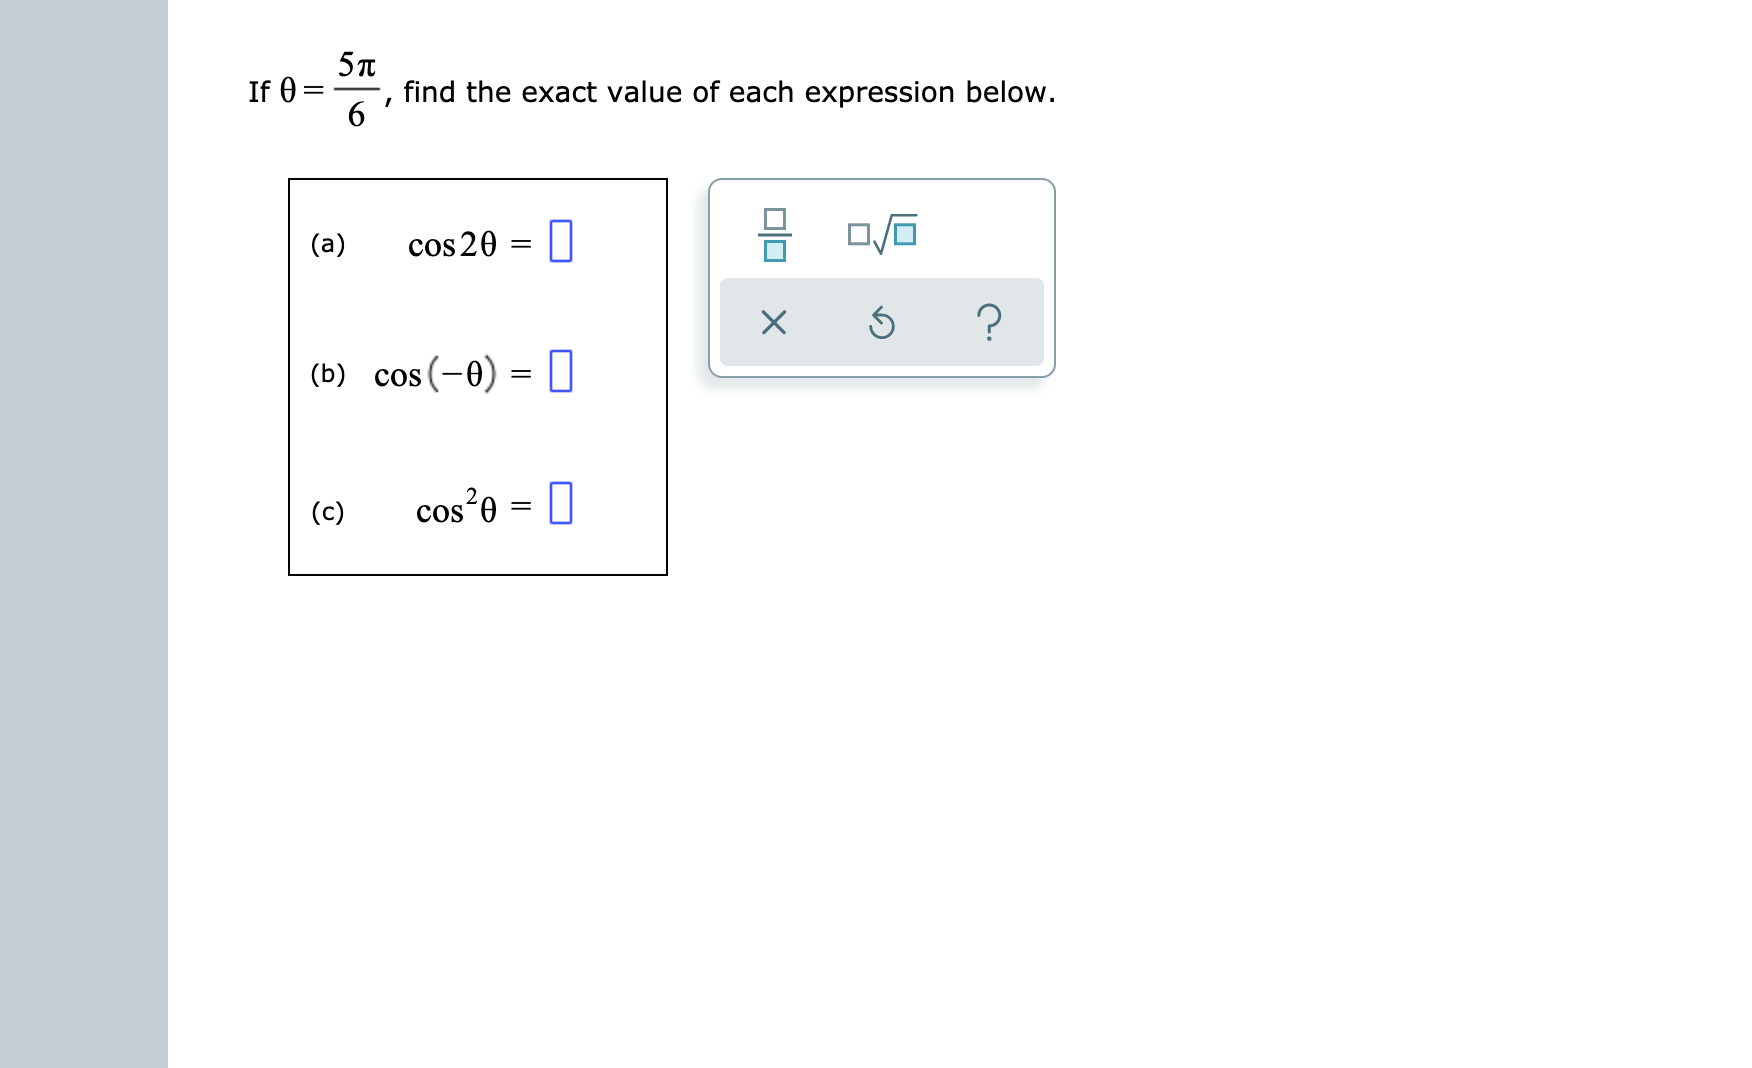 5л
find the exact value of each expression below.
If 0
6
cos 20
(a)
?
(b) cos (-0) I
cos e
(c)
=
COS
O X
